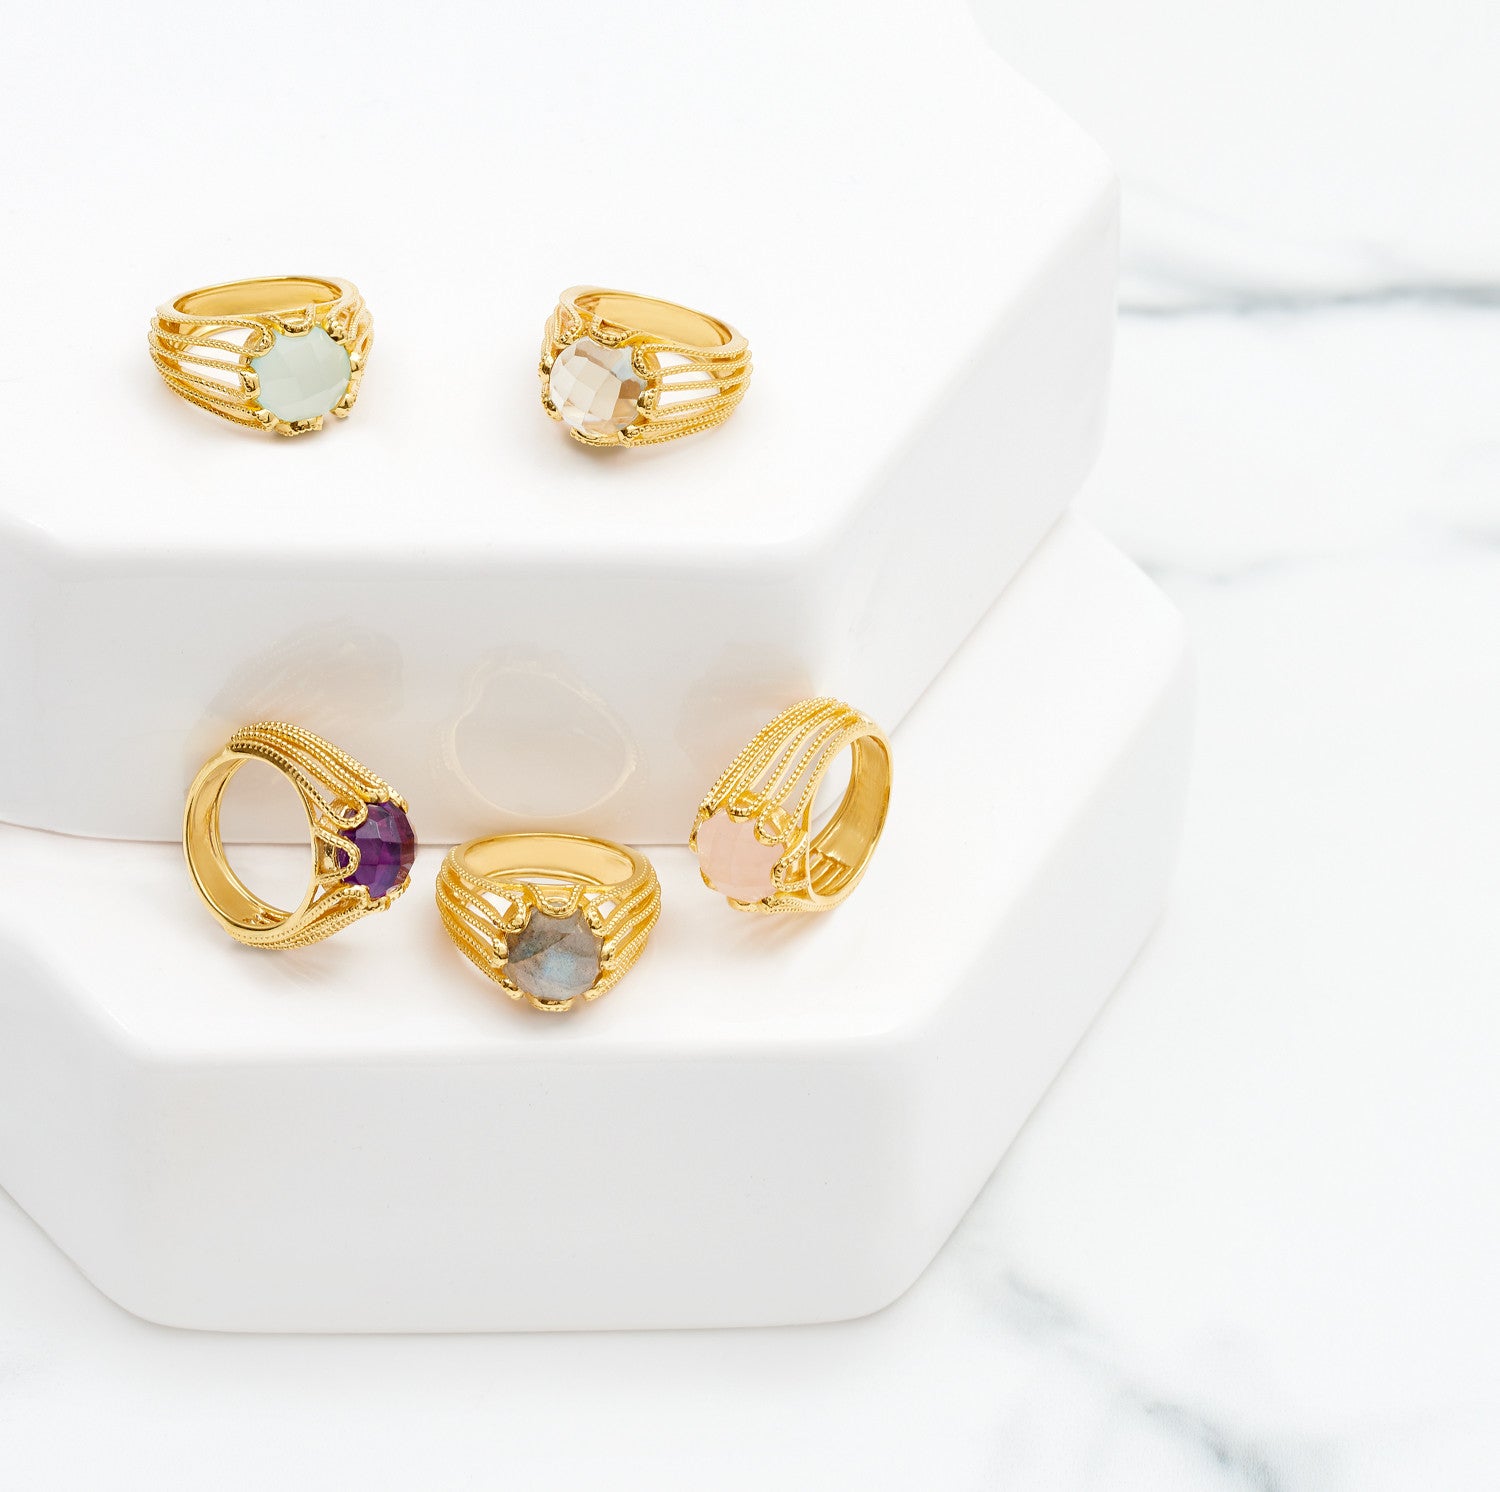 gold vermeil cocktail rings, natural gemstones, geometric, sustainable